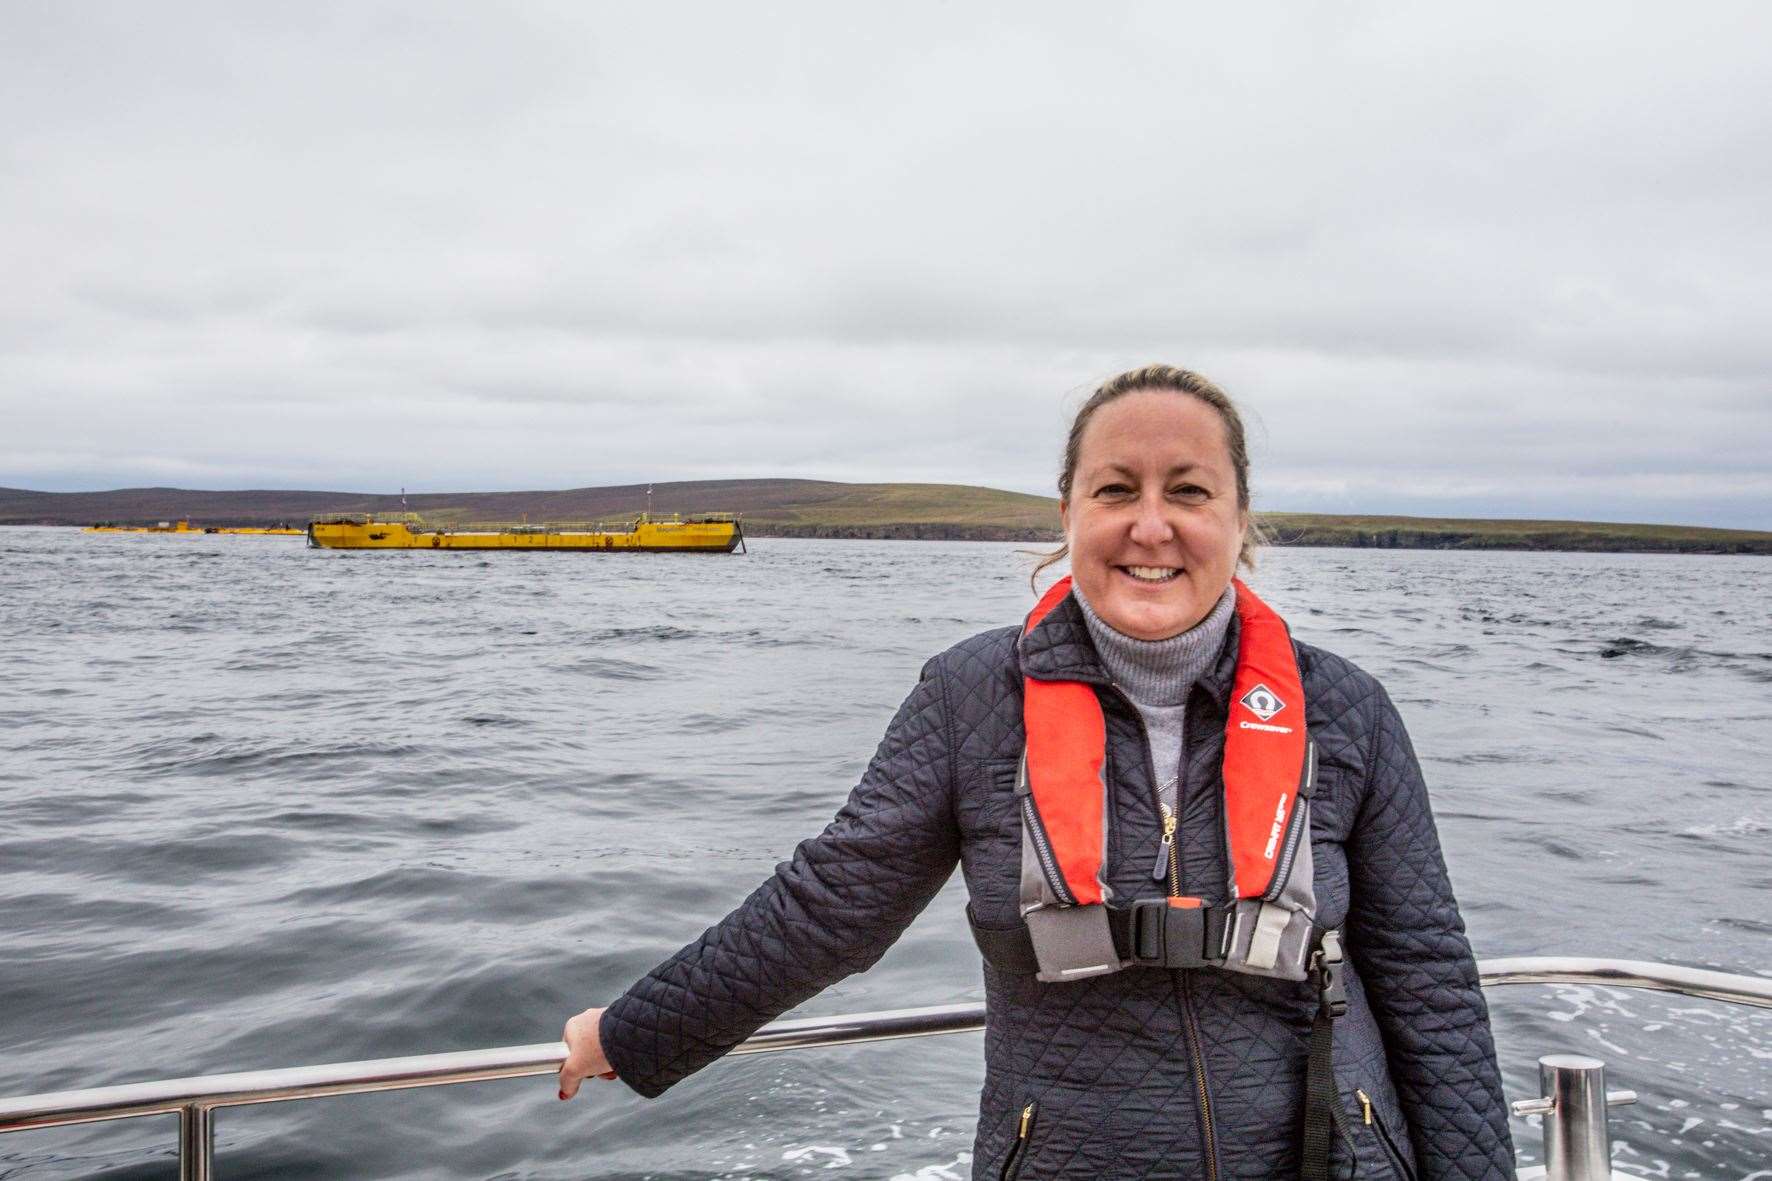 Anne-Marie Trevelyan MP, Uk energy minister, at EMEC tidal test site to see the Magallanes and Orbital tidal turbines in action.